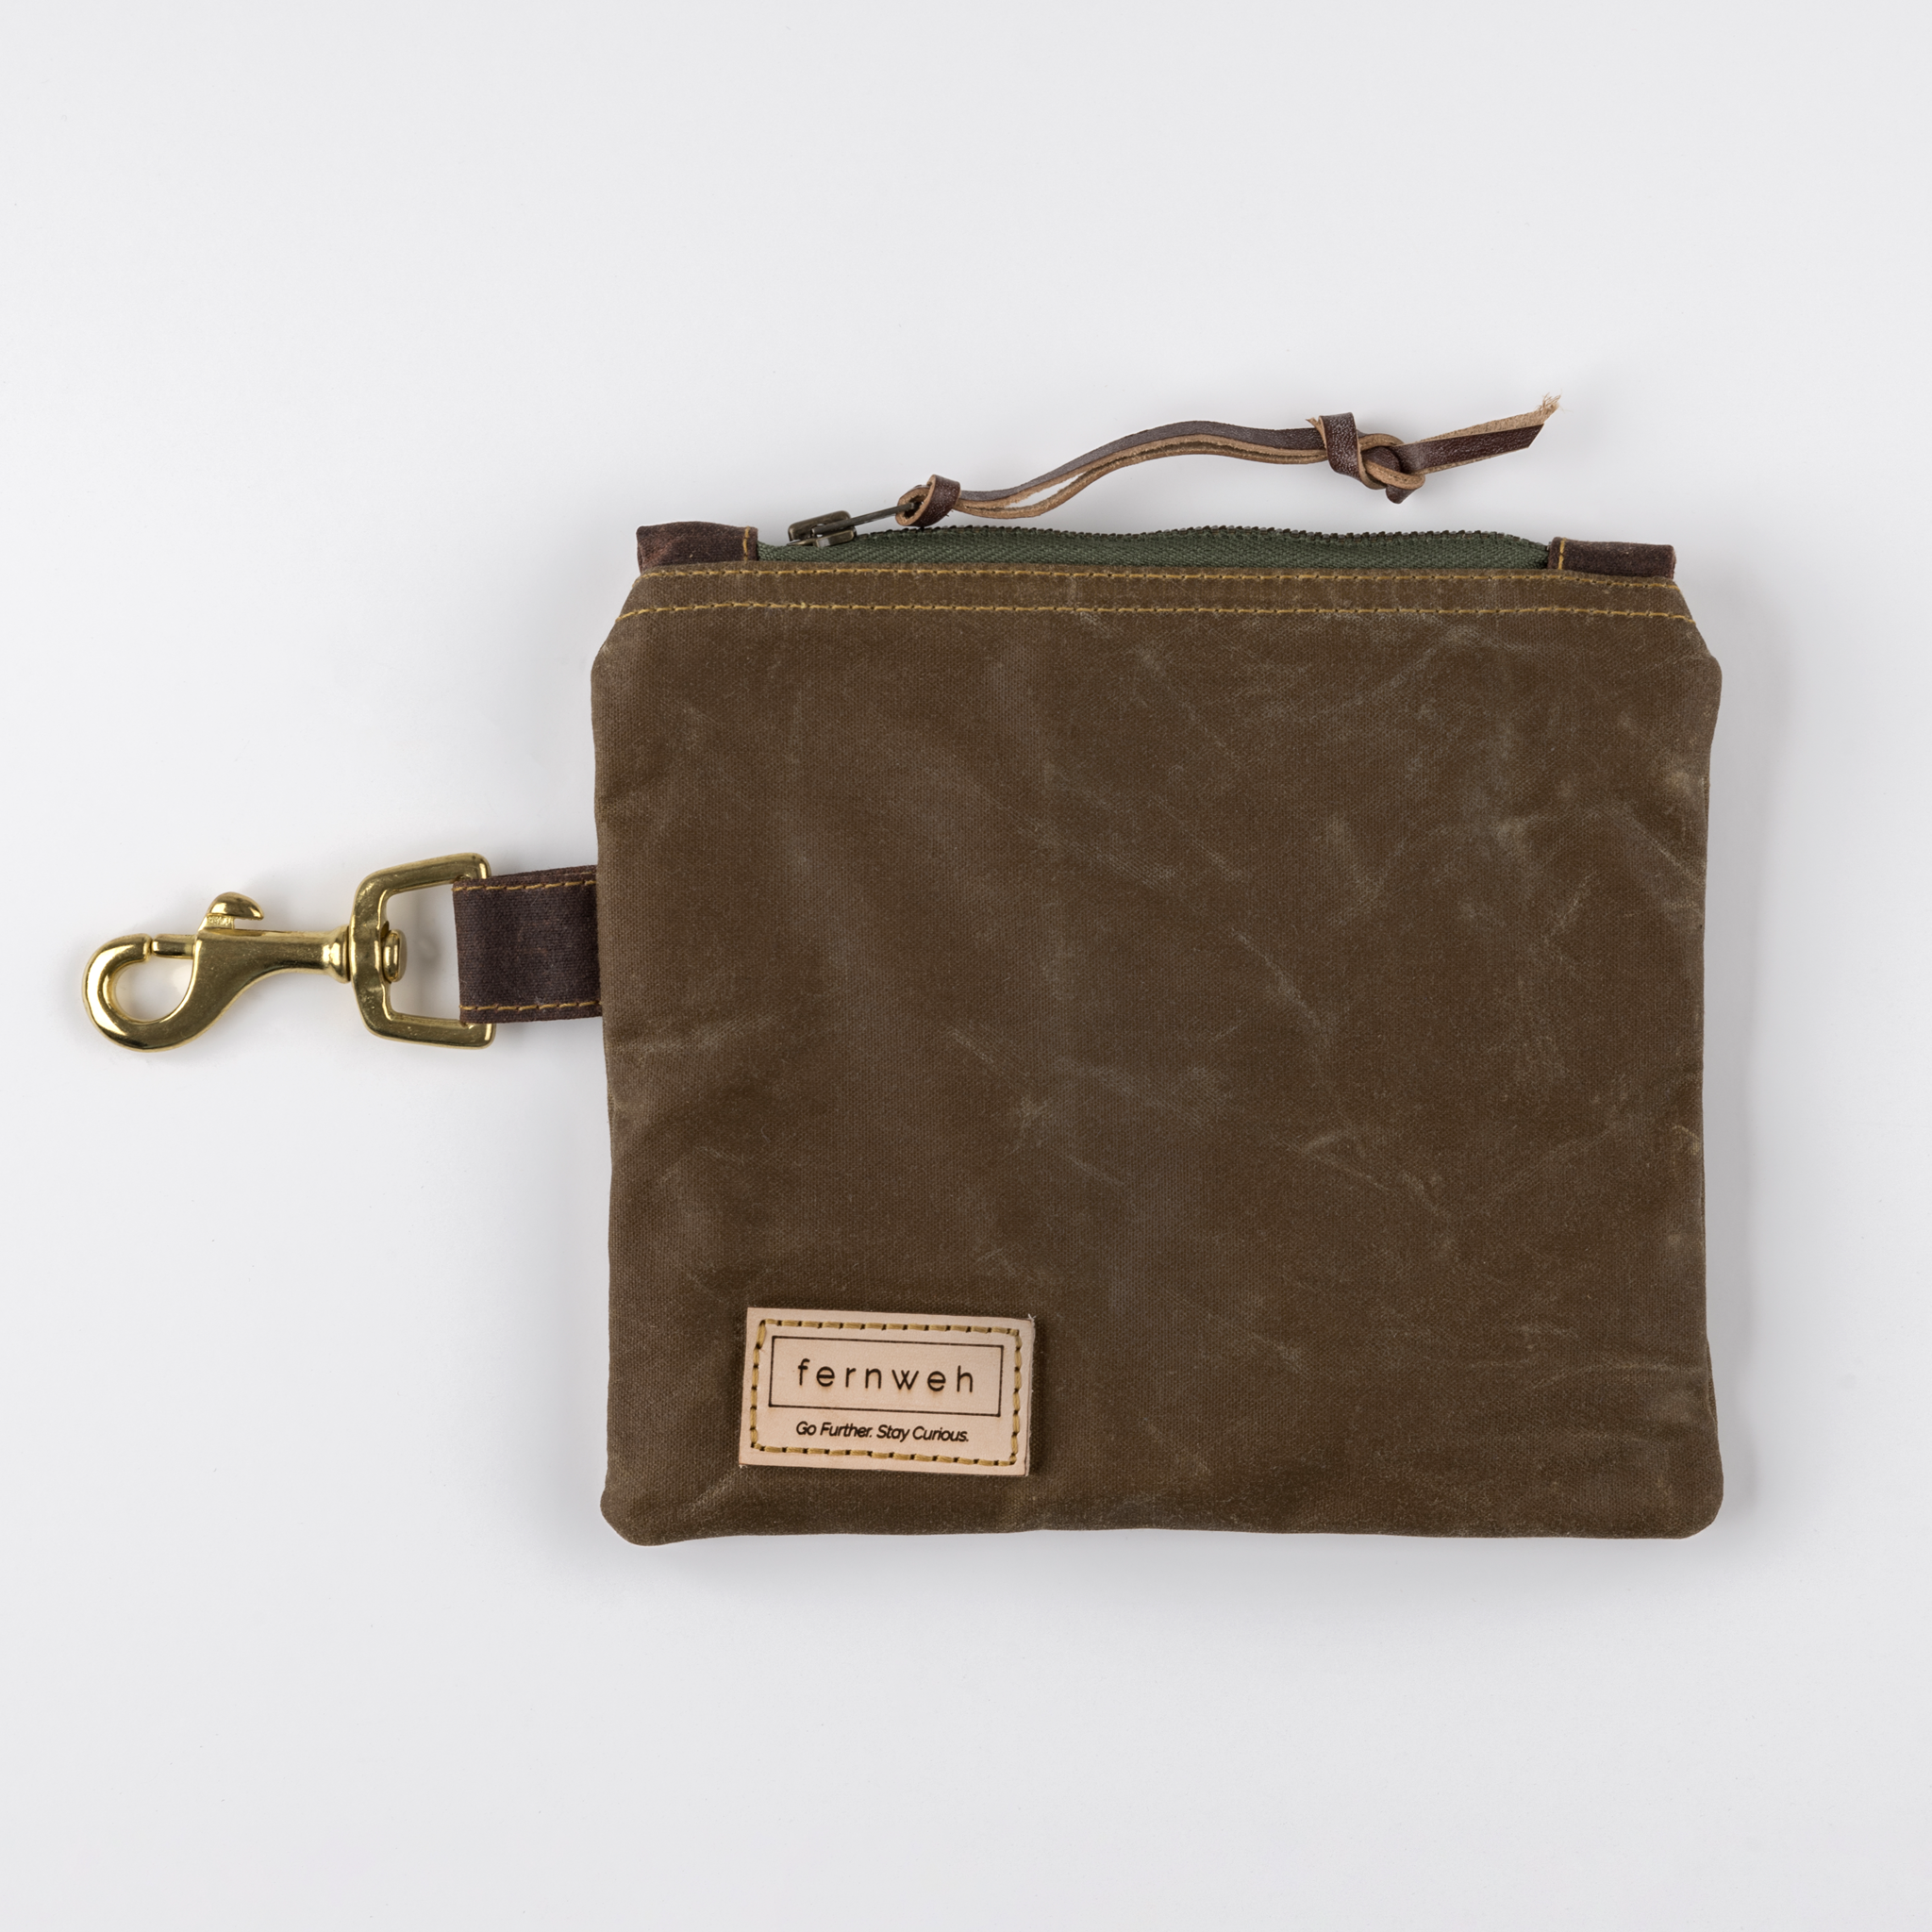 Image shows a Fernweh UK waxed cotton pouch in a brown shade, with a green zip. The pouch is on a white background and features a solid brass clip.